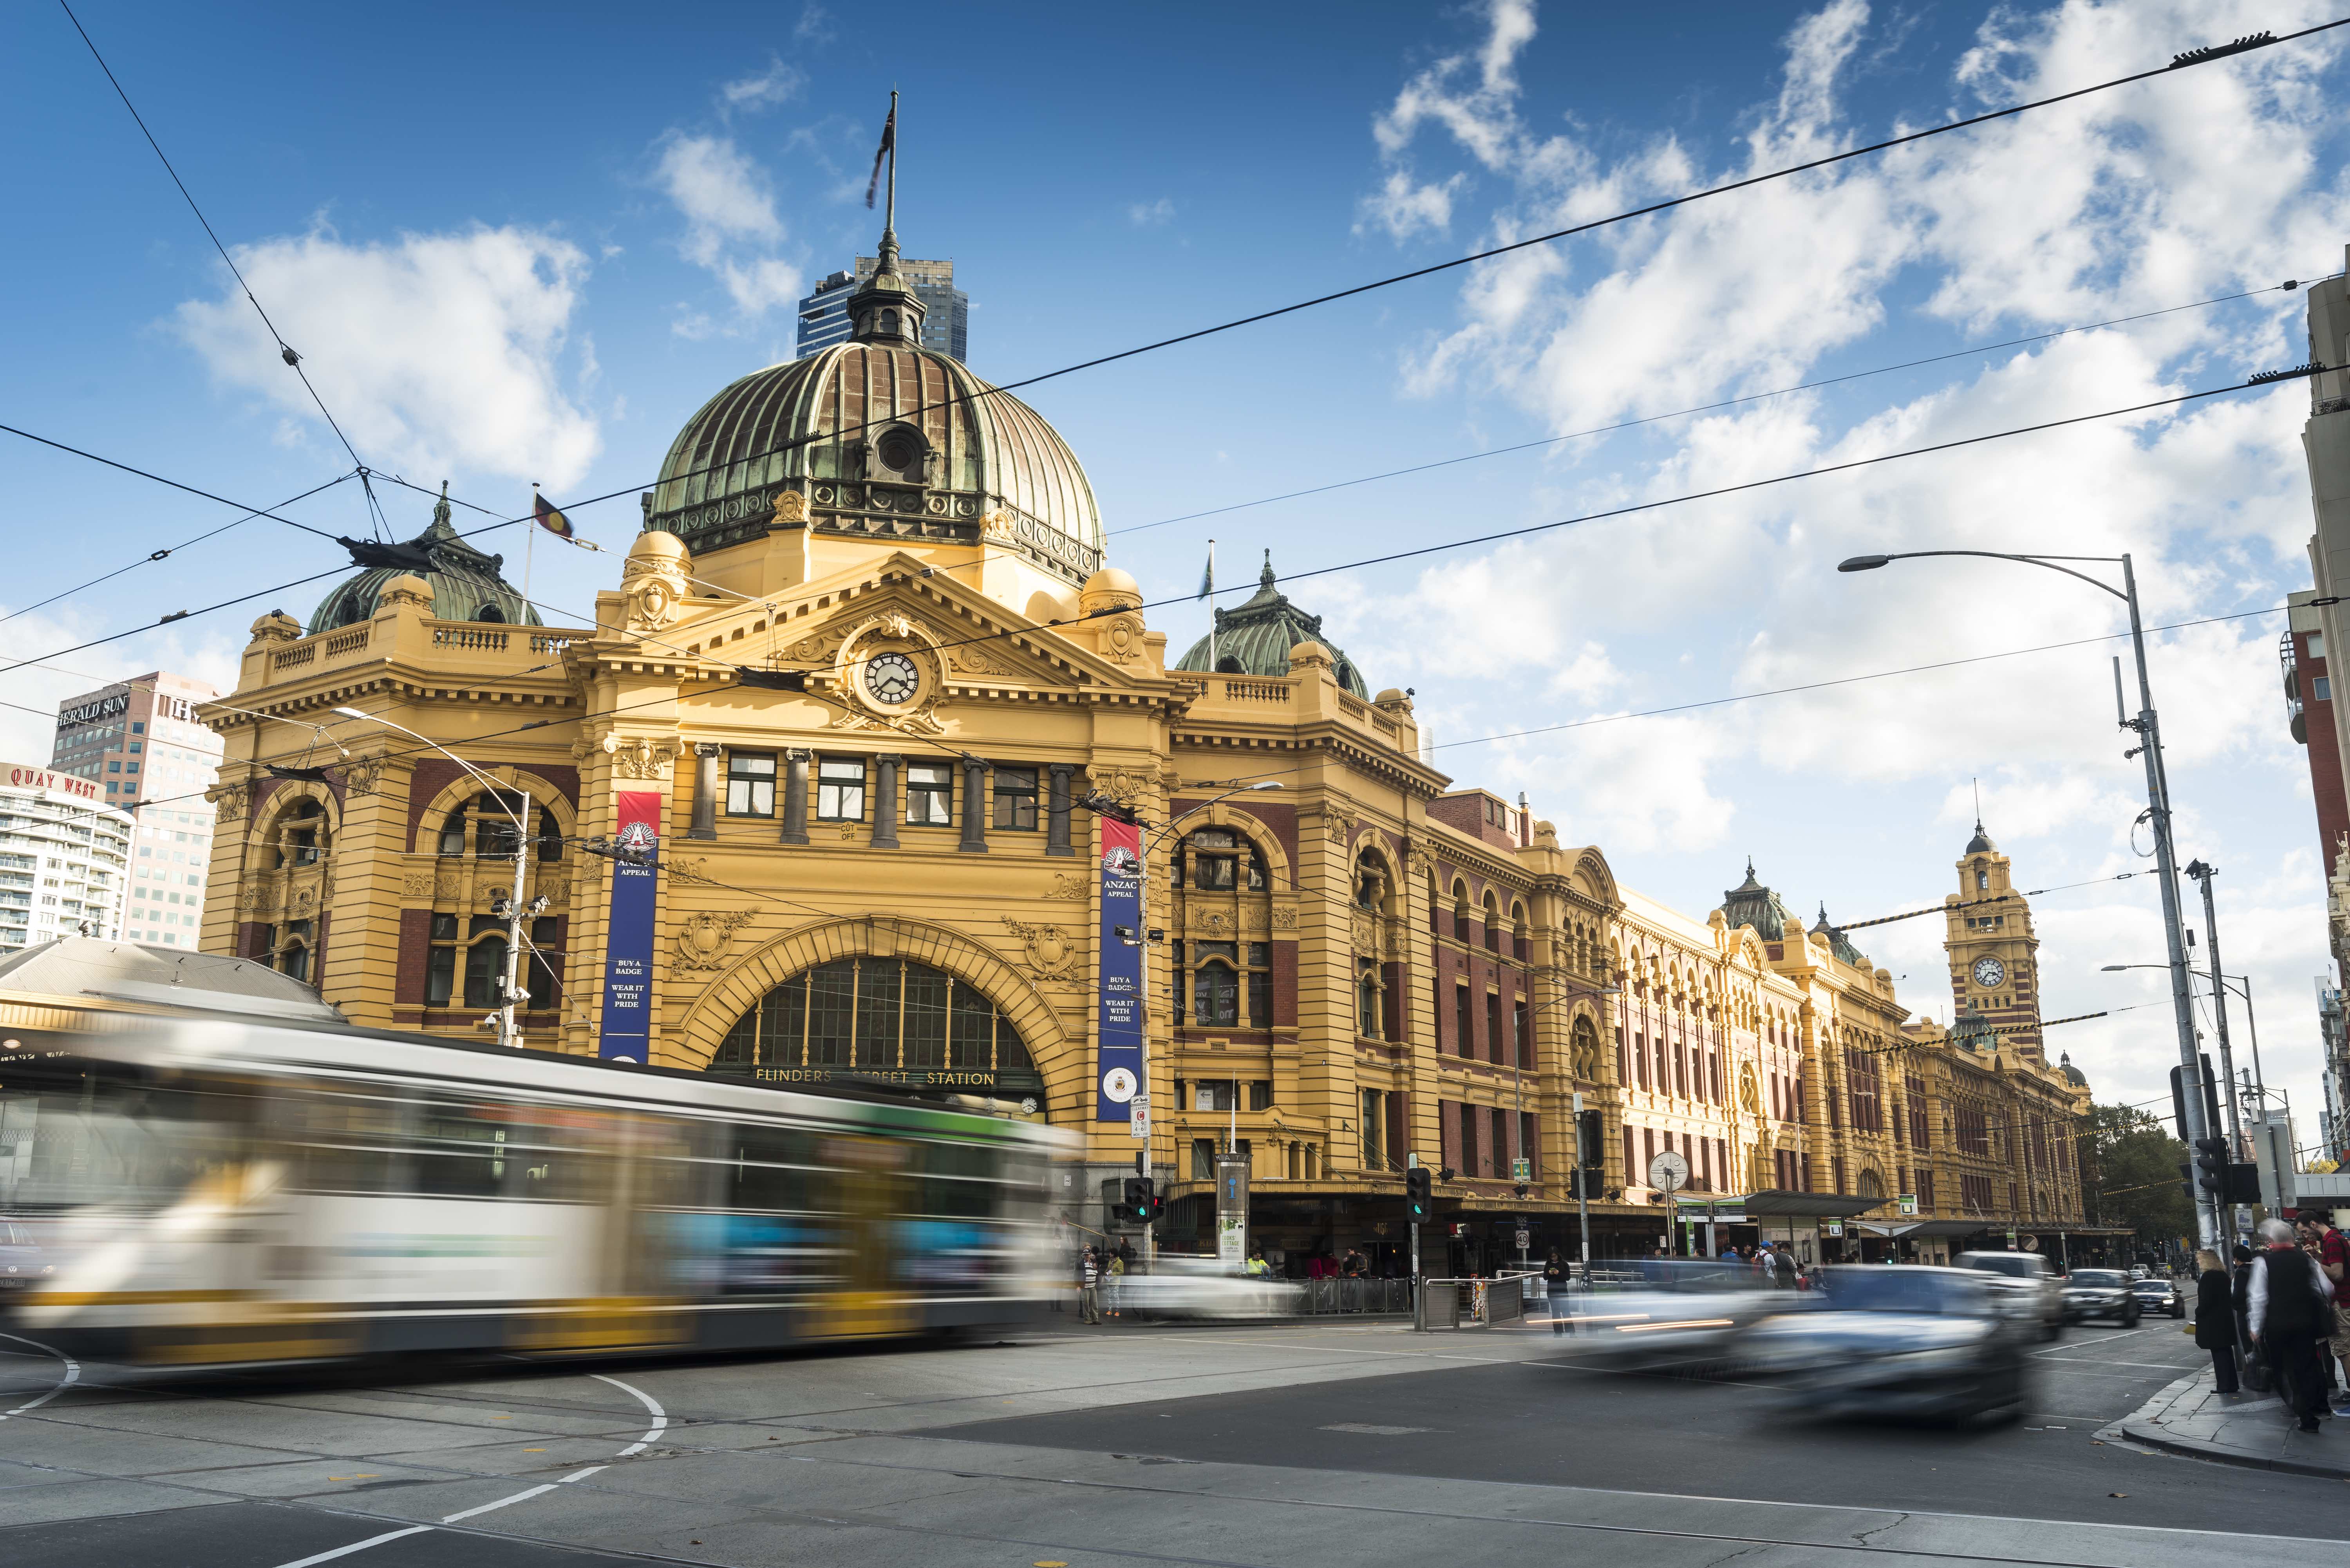 4D3N Melbourne With IBIS Melbourne Tour Package